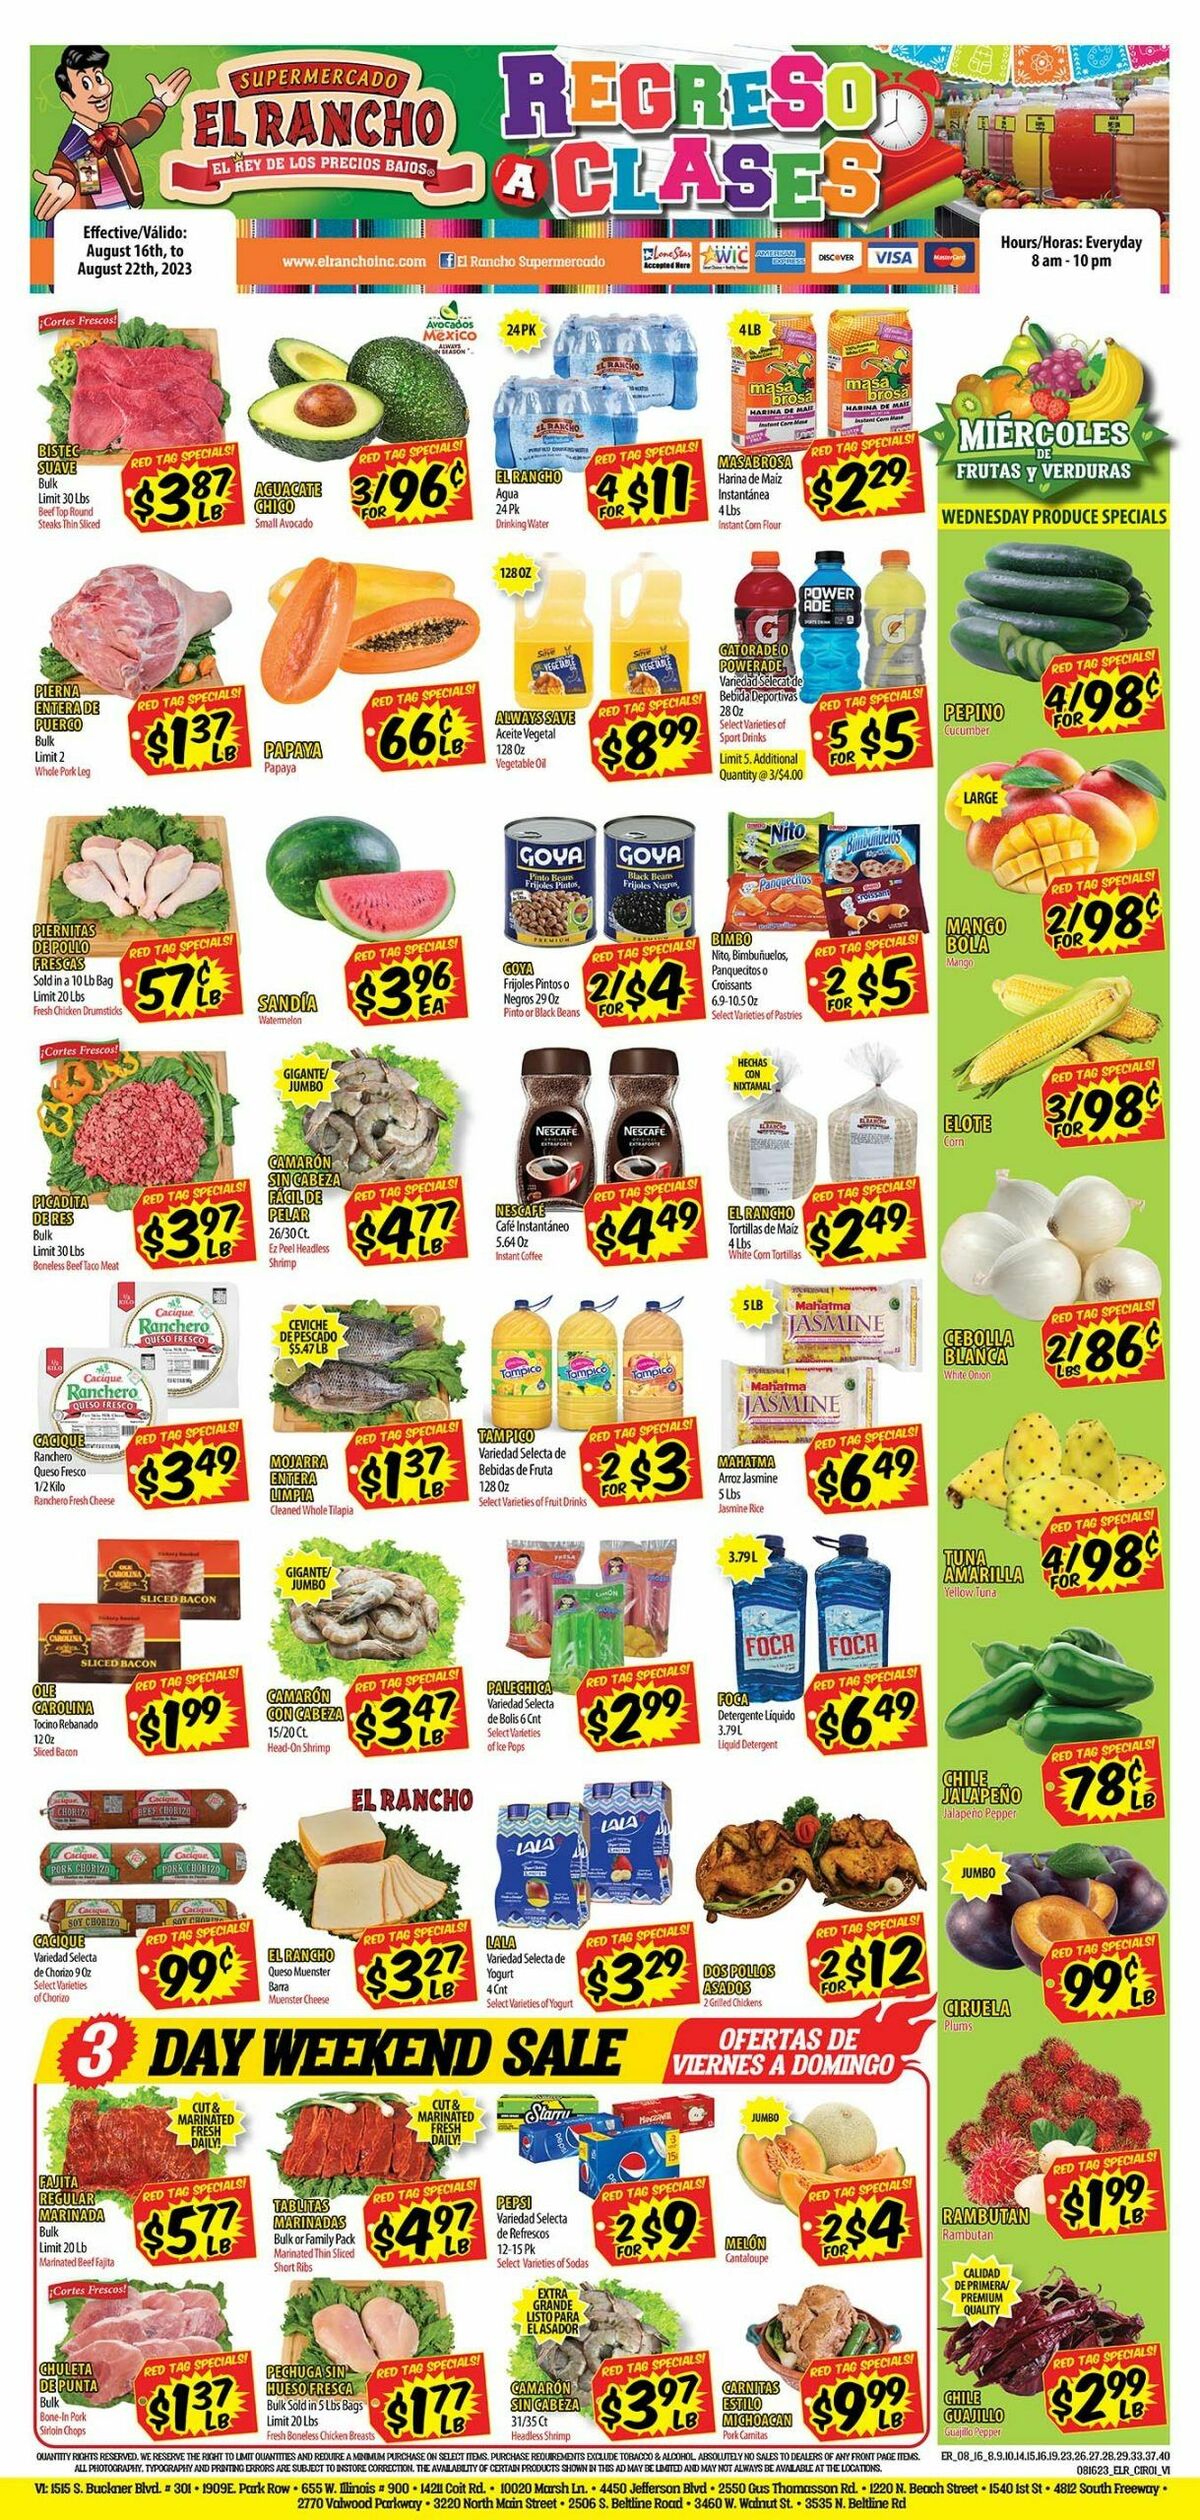 El Rancho Weekly Ad from August 16